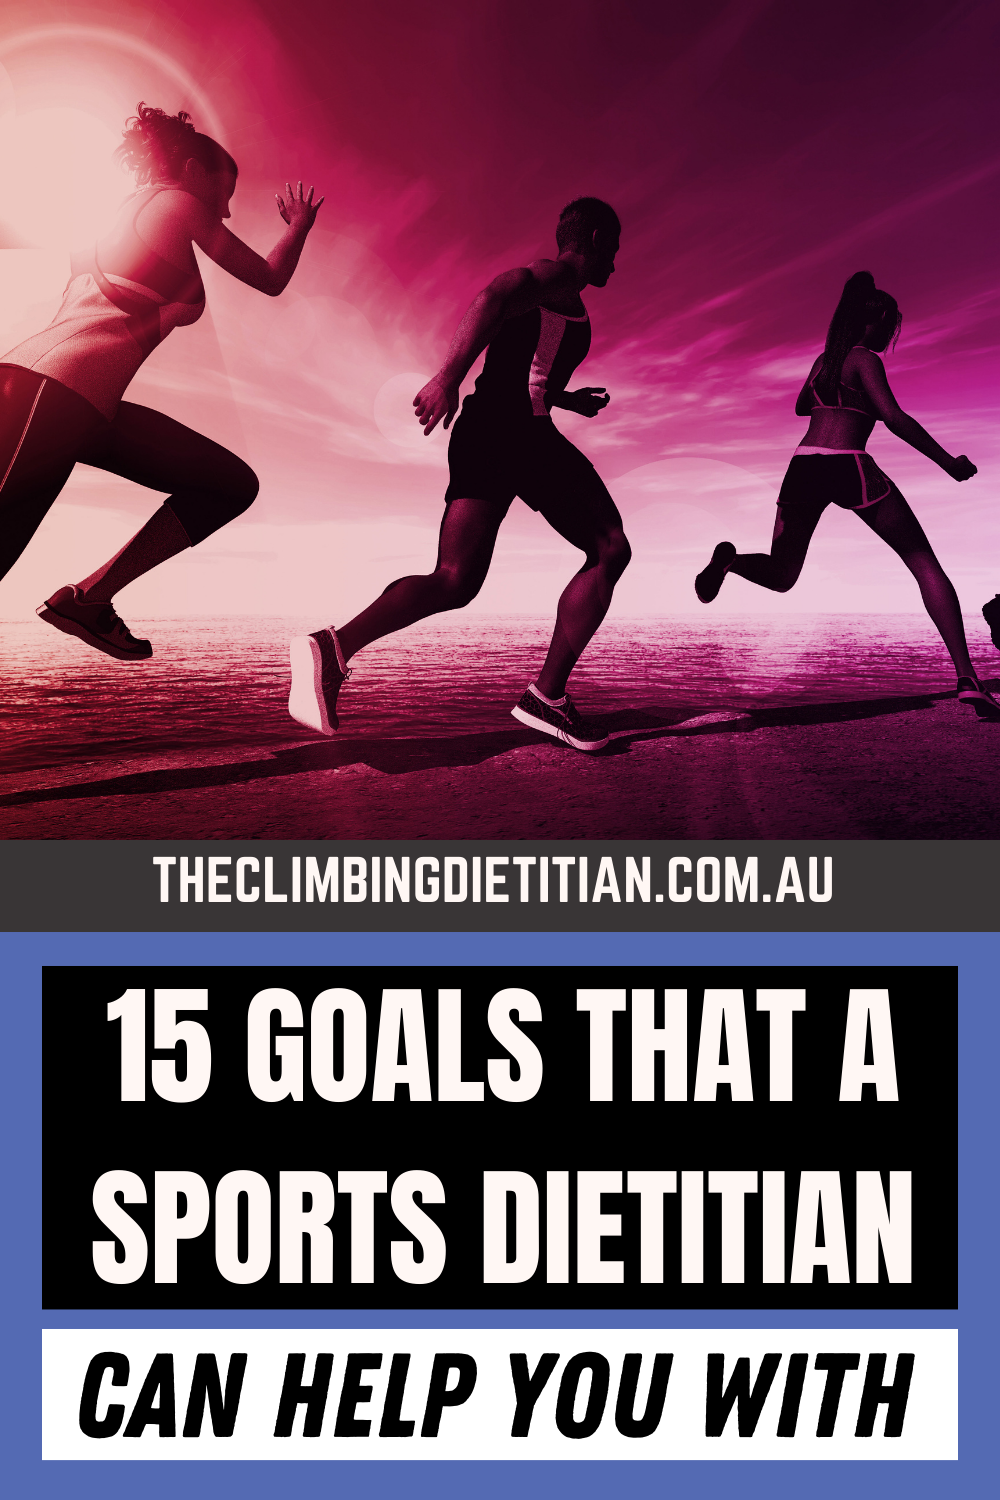 15 Ways A Sports Dietitian and Nutritionist Can Help You With-Brisbane-Dietitian-Nutritionist